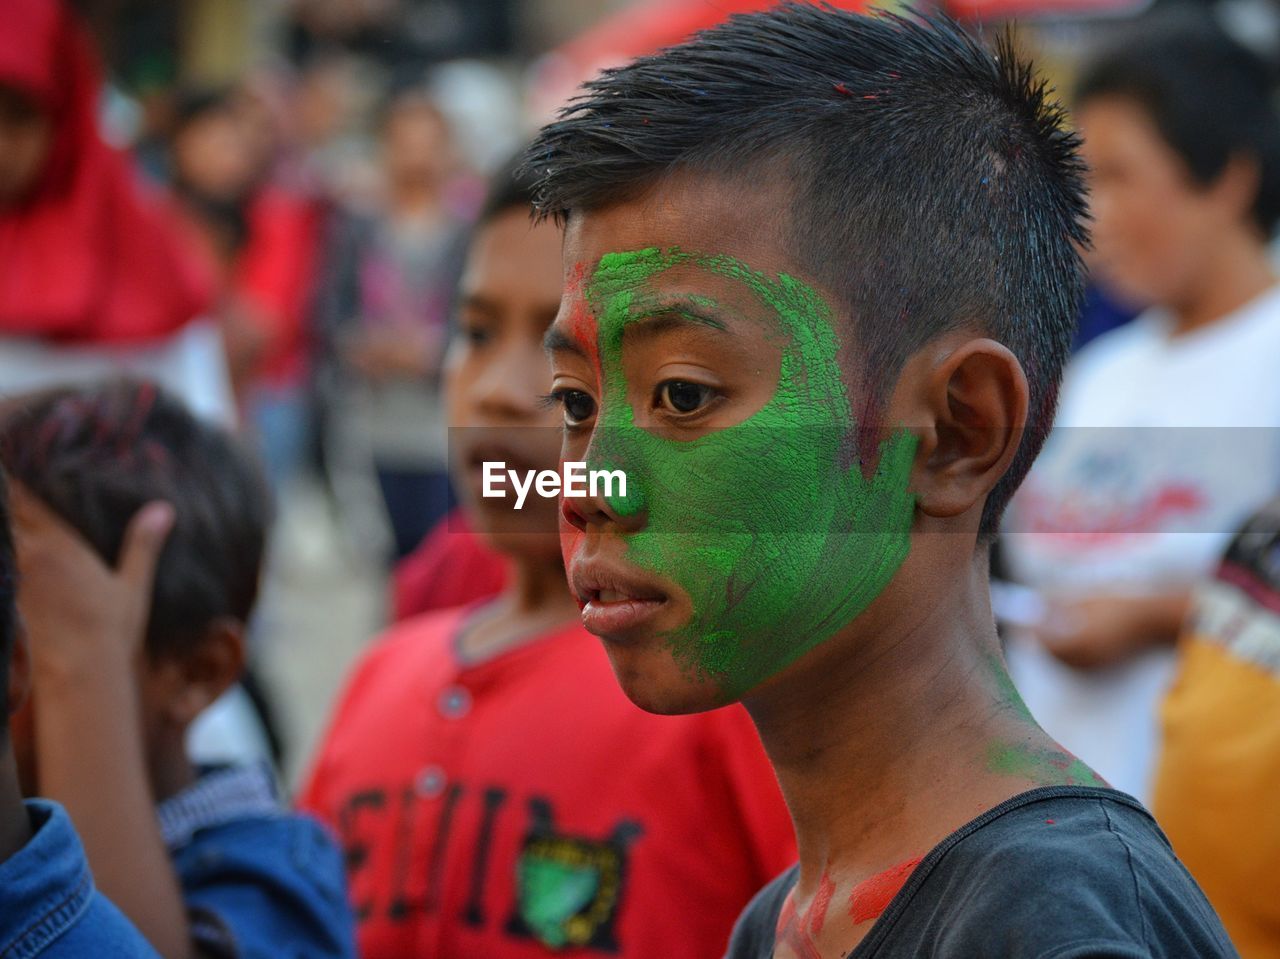 Close-up of boy with green face paint during celebration